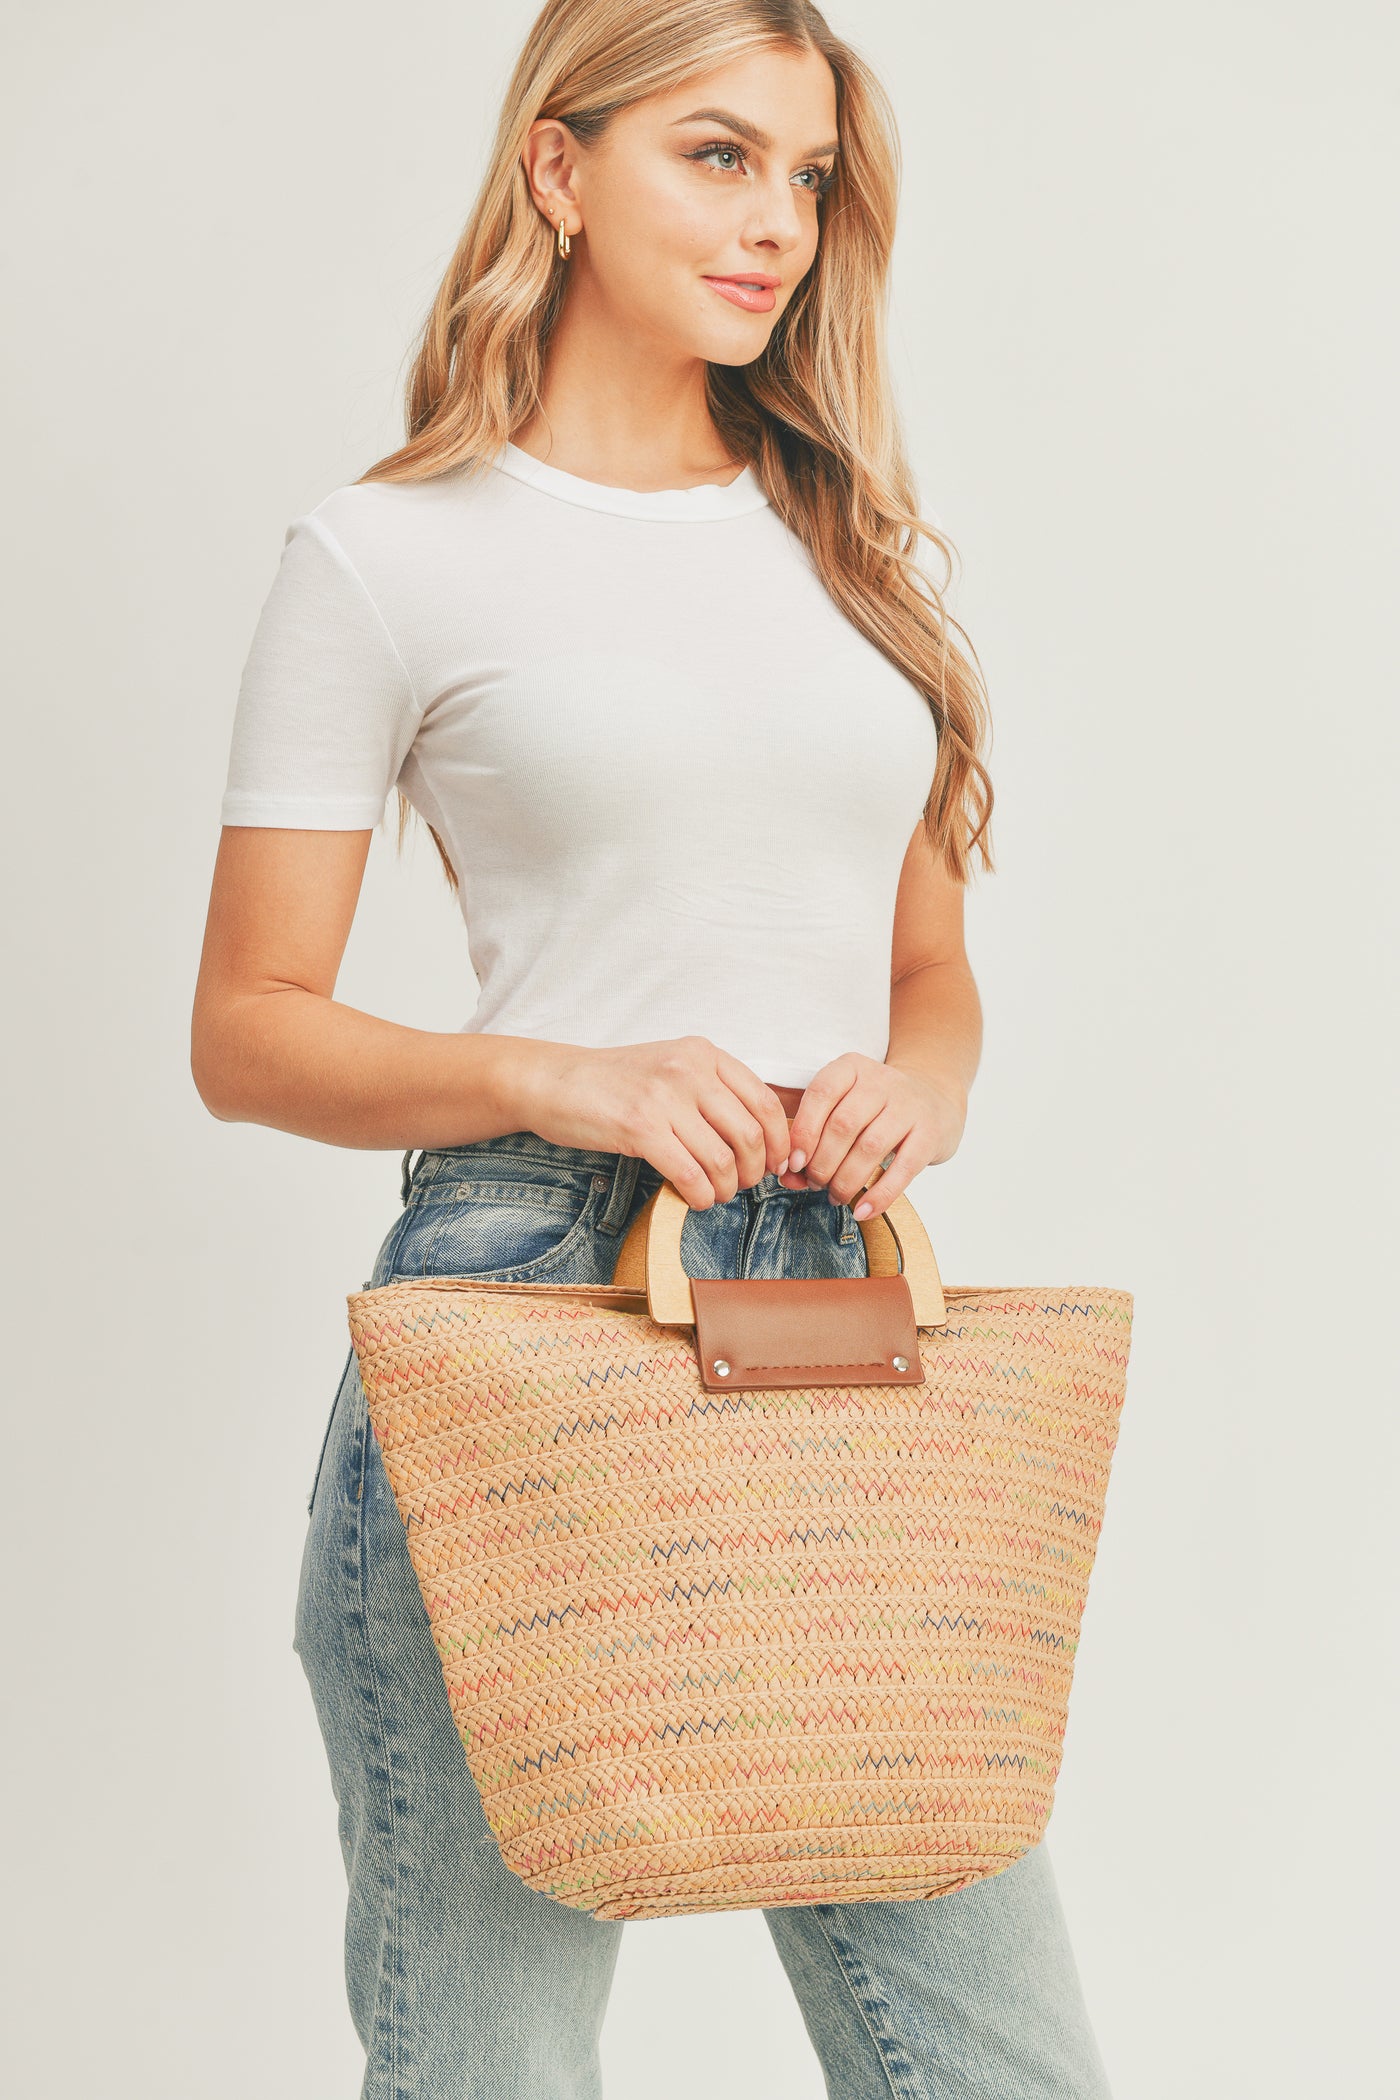 STRAW TOTE BAG WITH WOODEN HANDLE